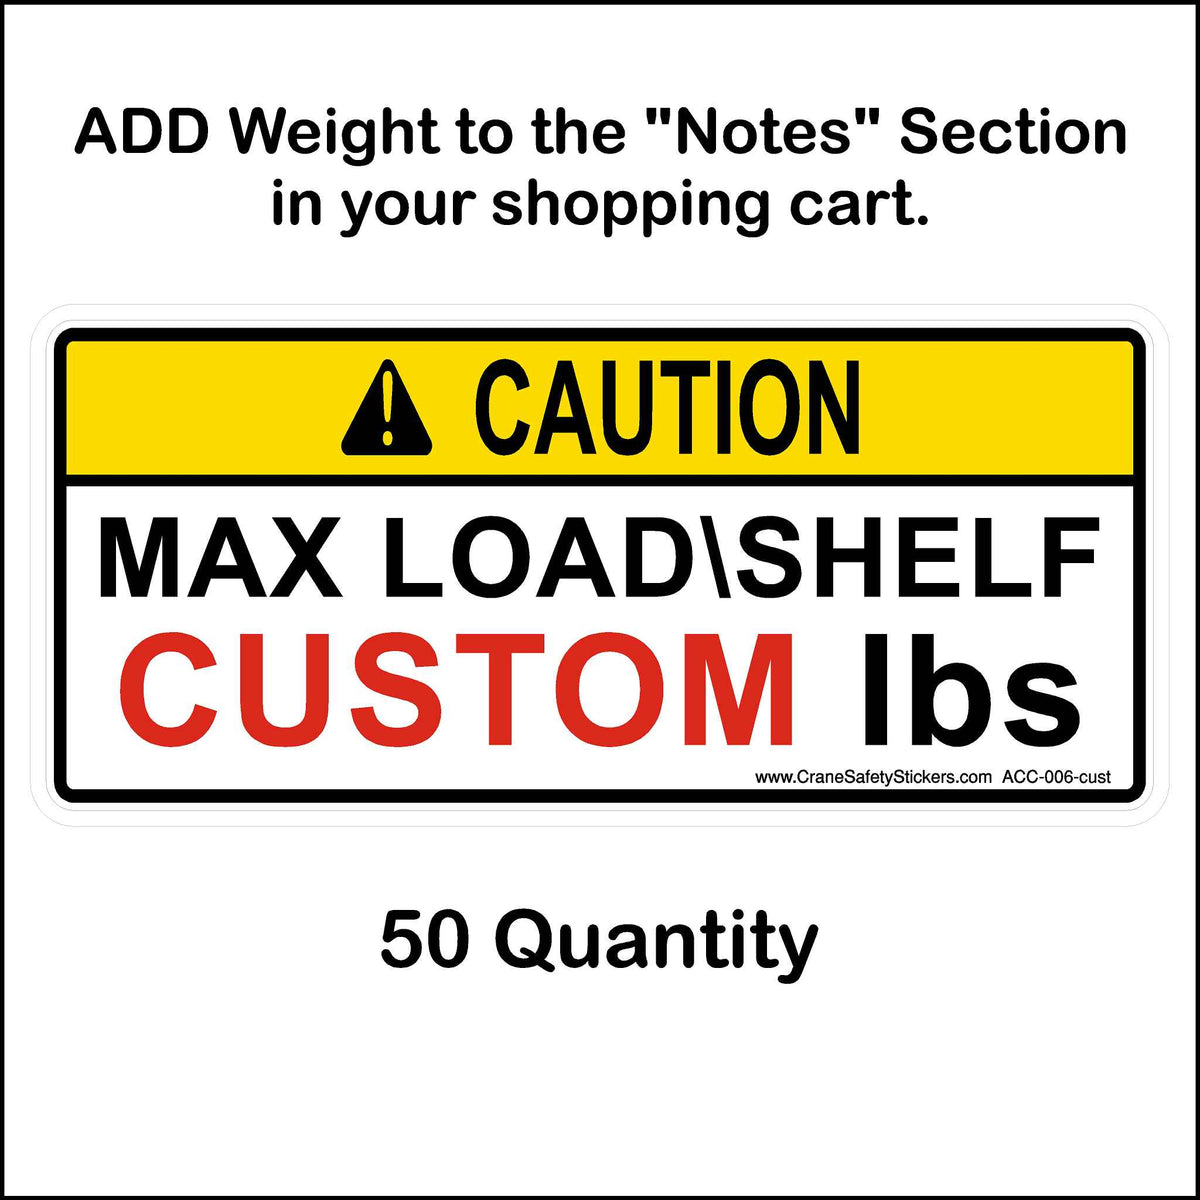 Custom Small Pallet Racking Sticker Printed with Caution Max Load Shelf. 50 Quantity.